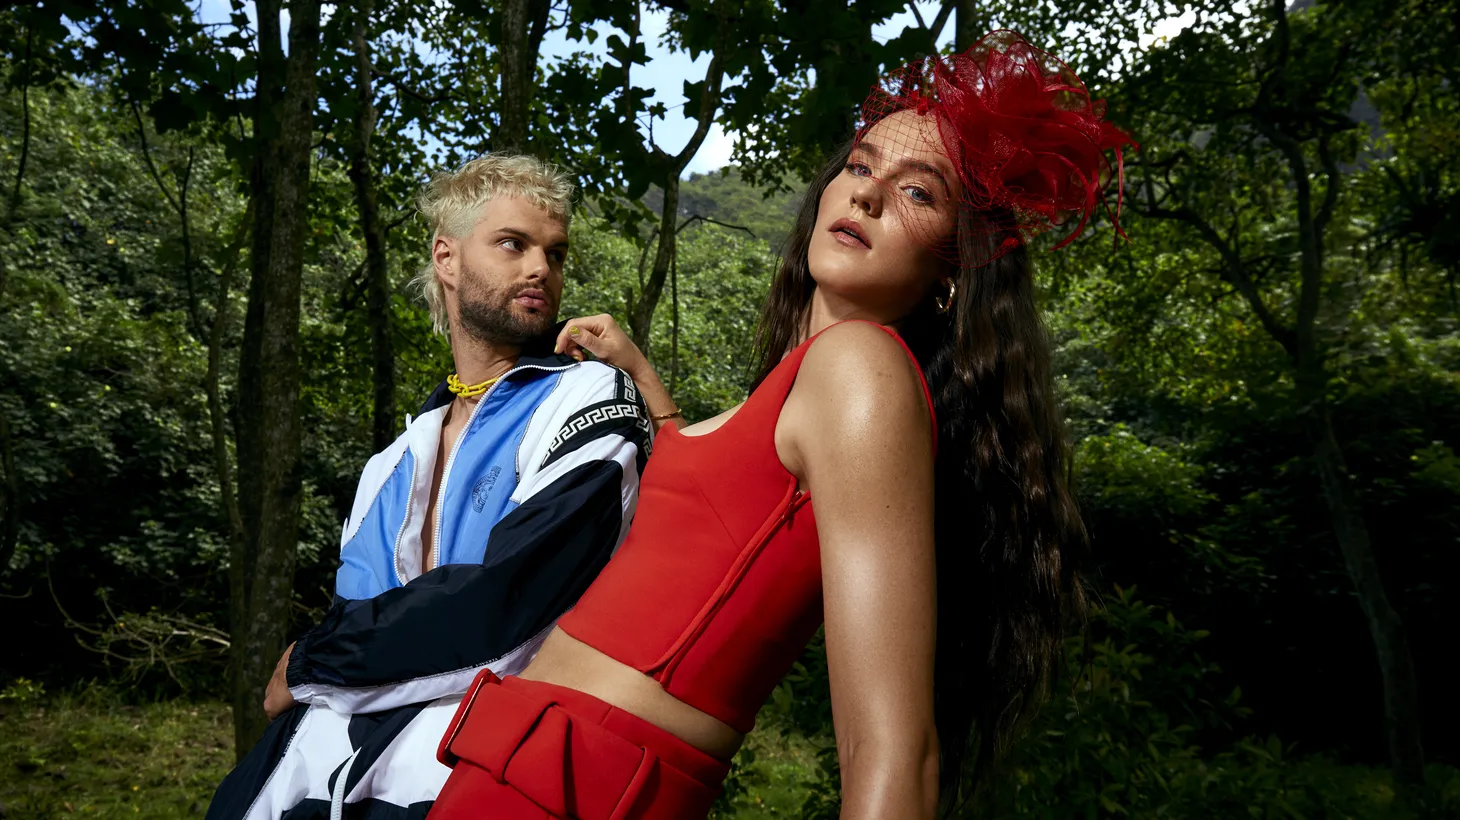 Short and sweet like the spring season, dance duo SOFI TUKKER set their sights on “Kakee,” the Brazilian Portuguese word for persimmons. This playful song is sexy, juicy, and full of double entendres.